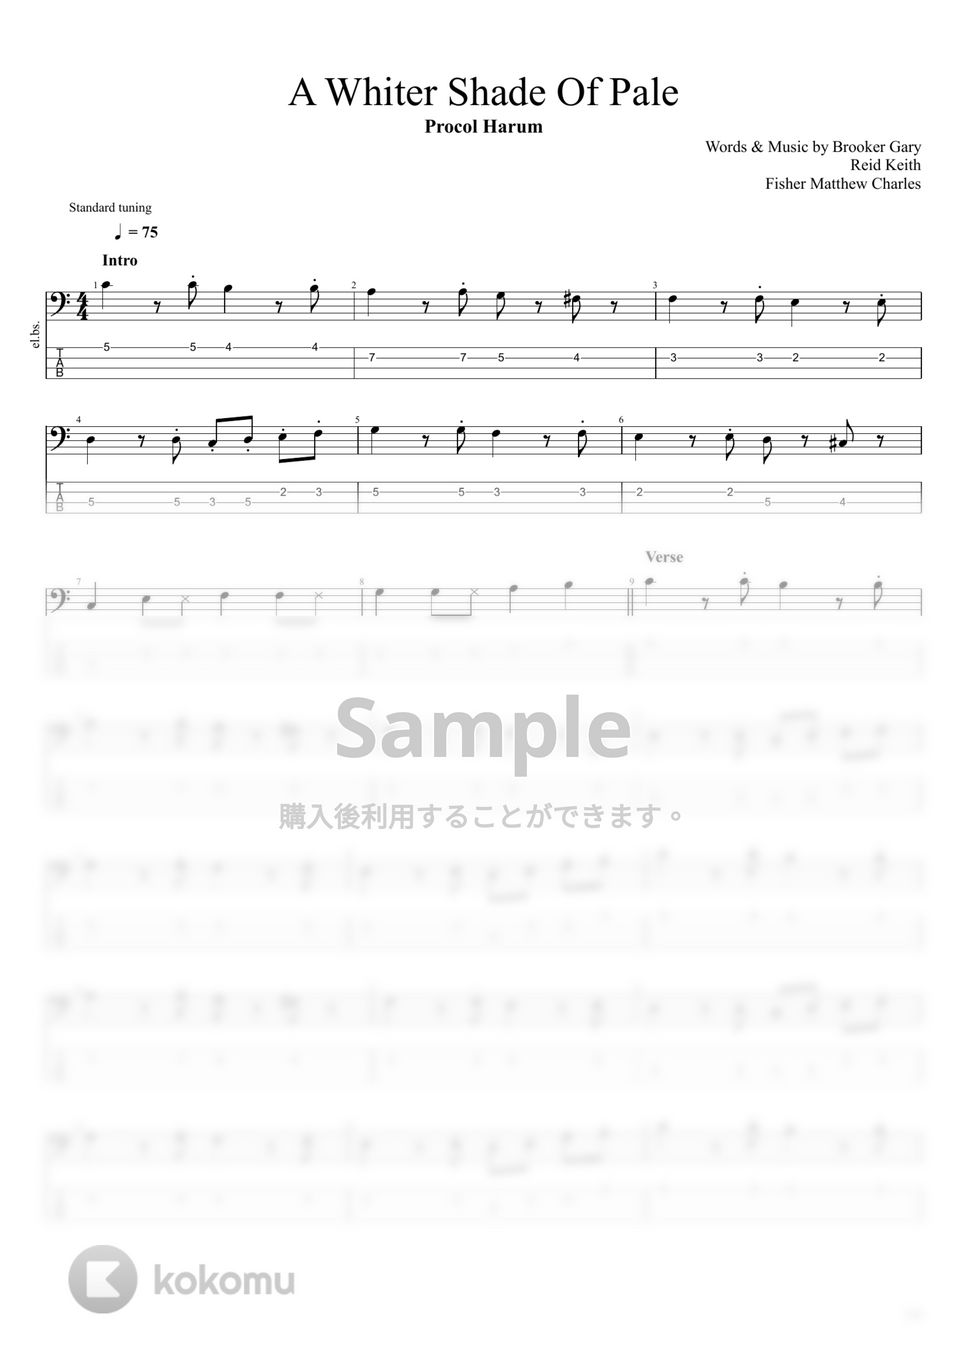 Procol Harum - A Whiter Shade Of Pale by まっきん